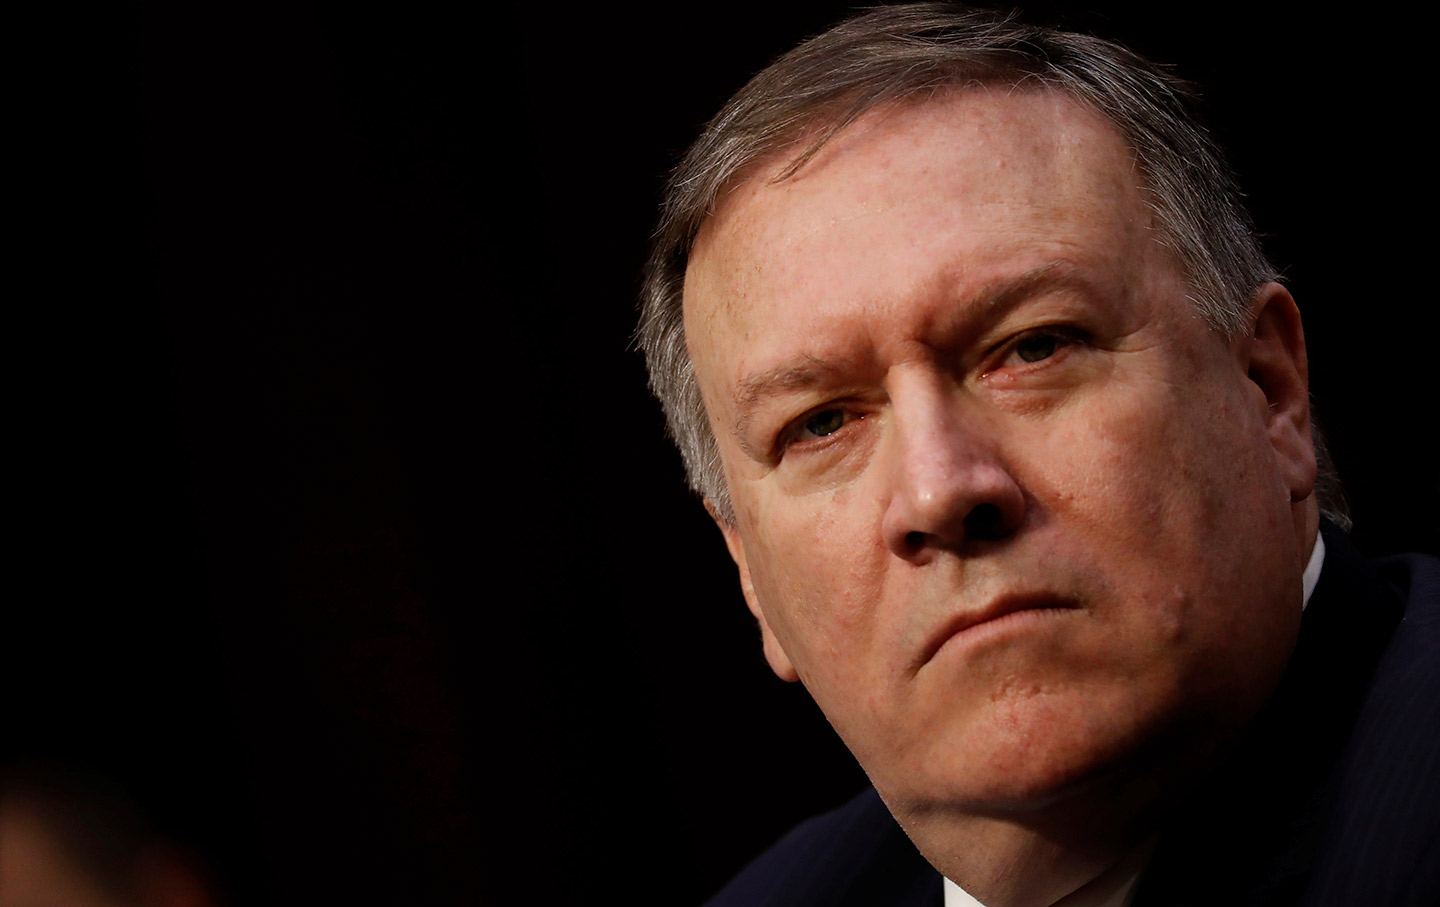 If Americans Die in the Escalating Iran Crisis, Remember That Mike Pompeo Called It ‘a Little Noise’